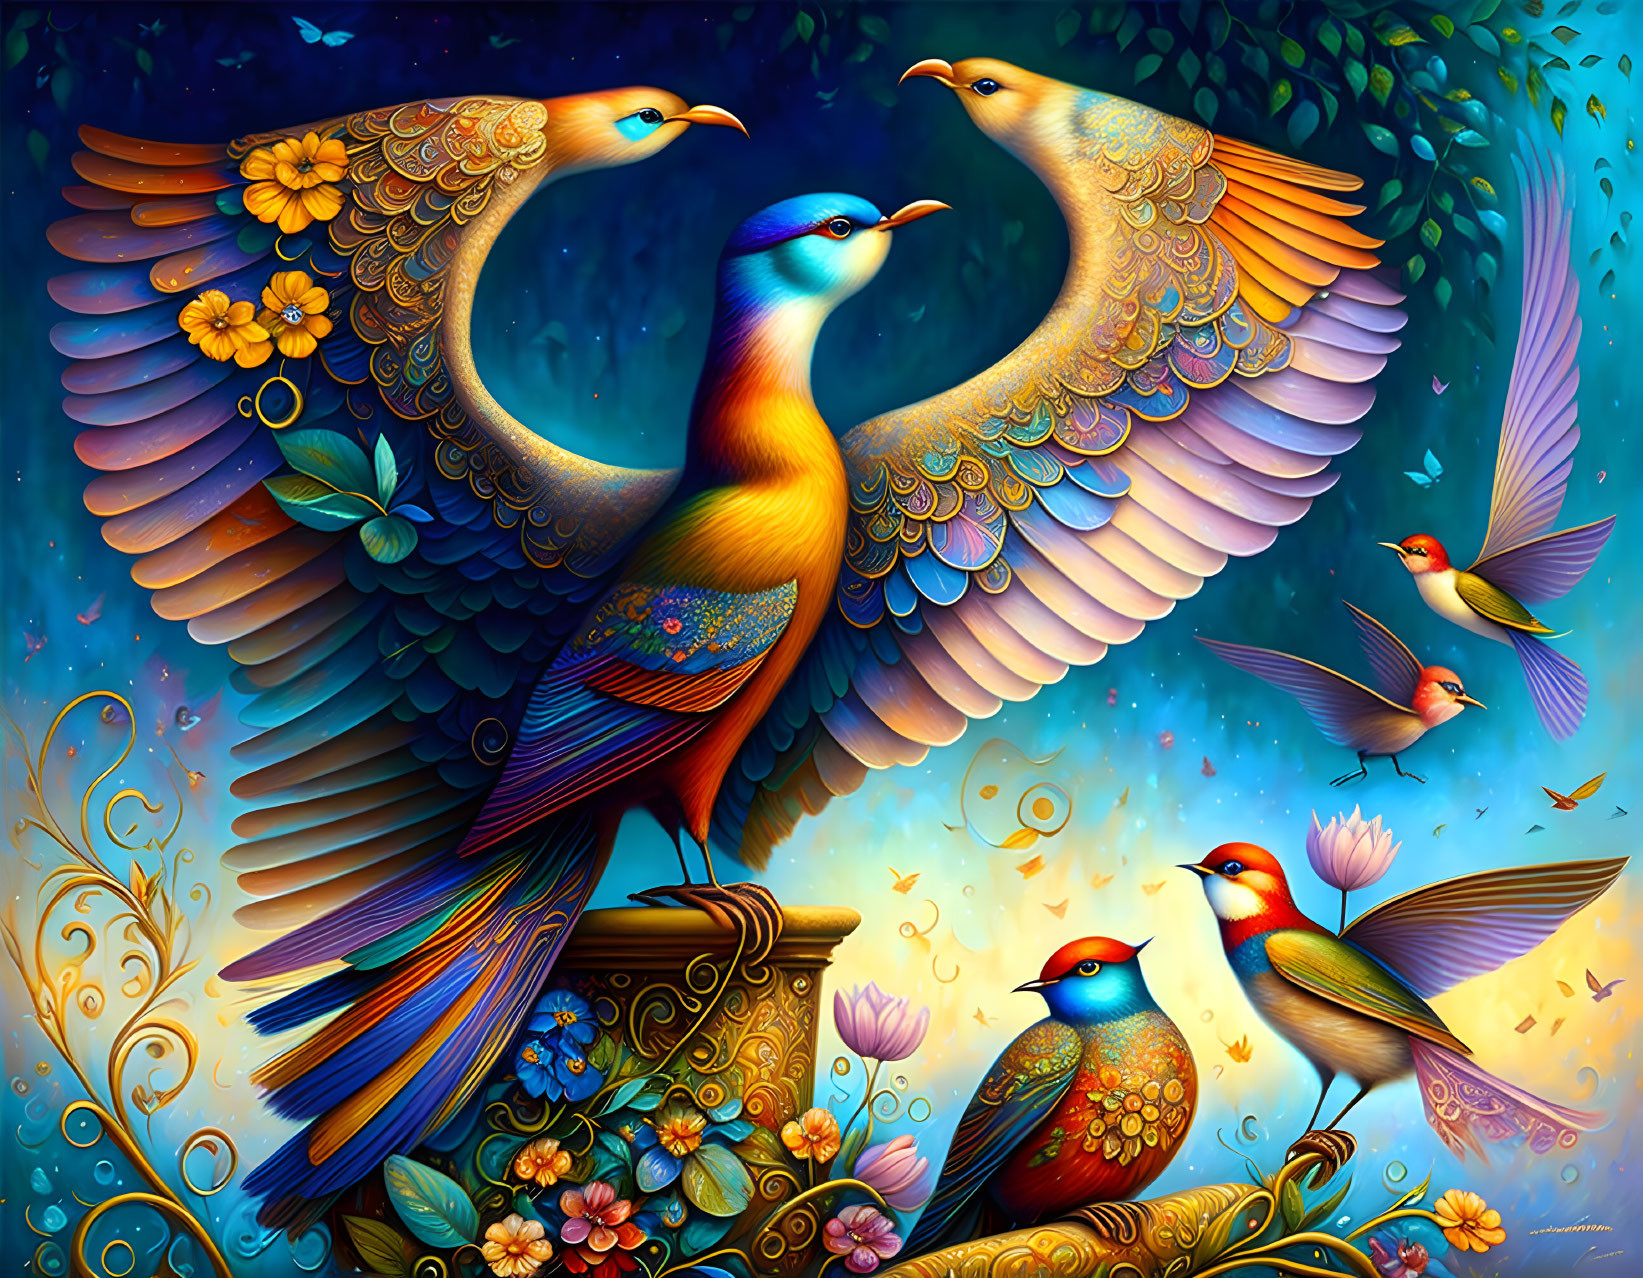 Vibrant peacock and bird artwork on blue background